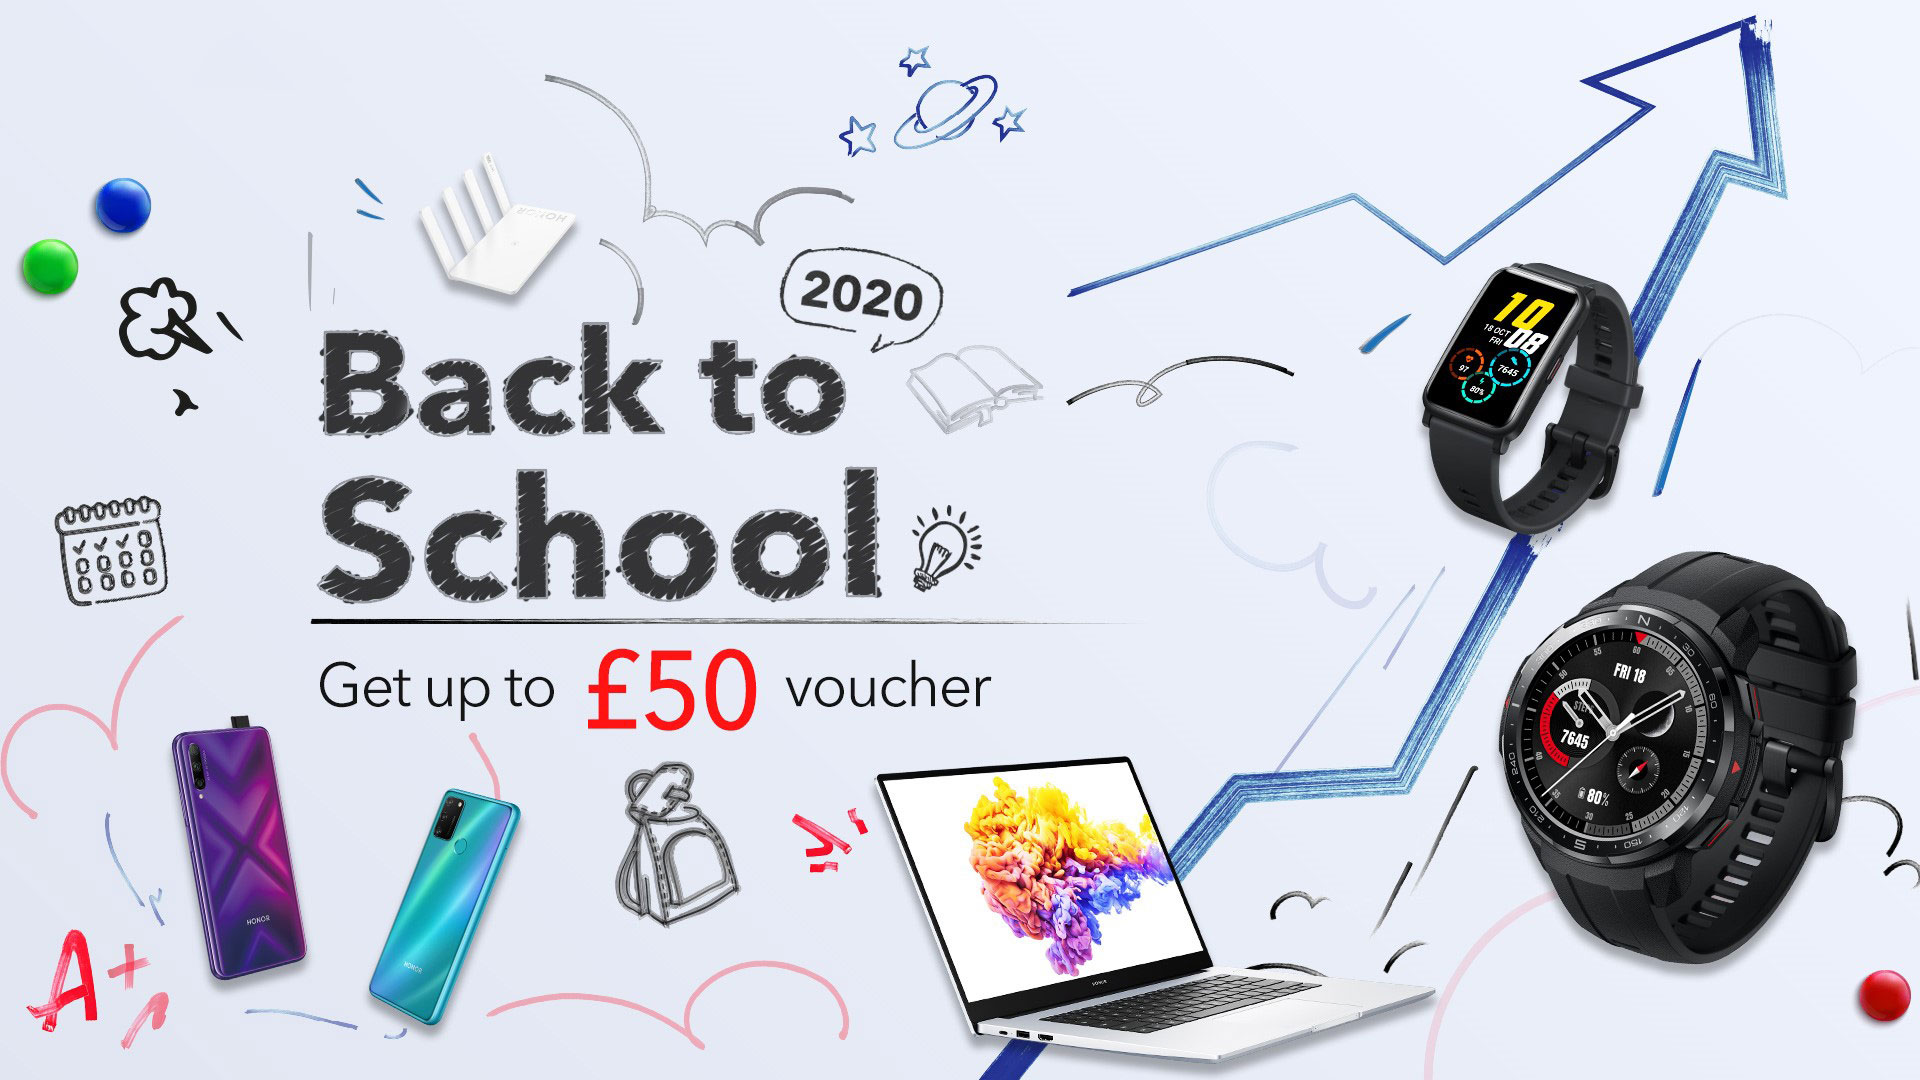 HONOR Back to School 2020 Adds Special Deals for New Products to “Expand Your Smart Life”